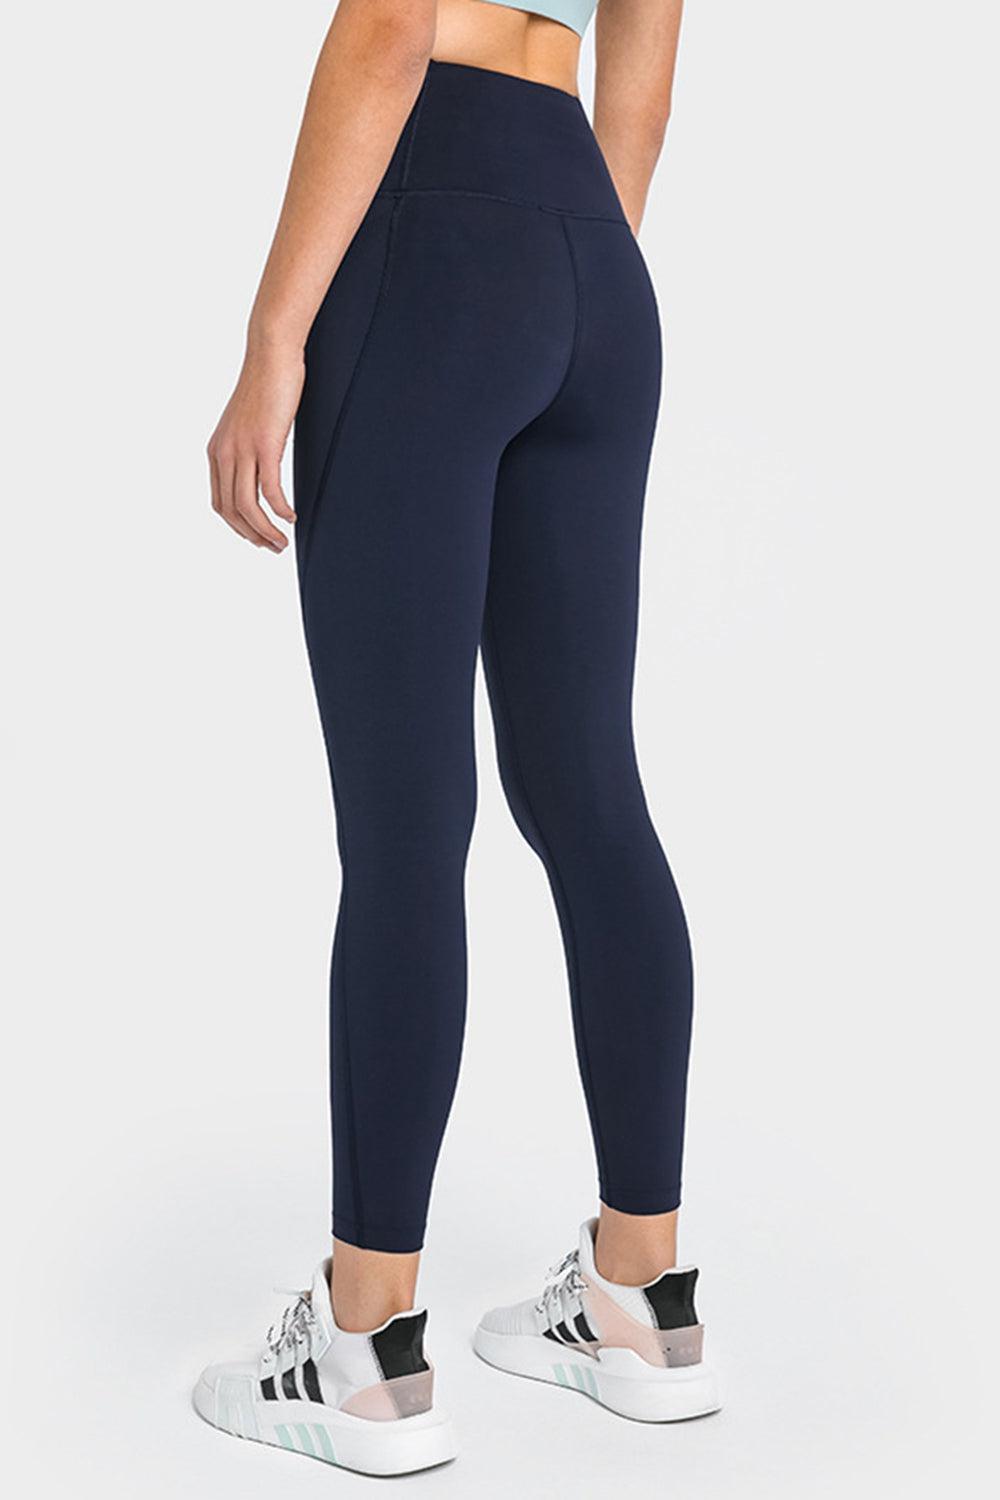 High Waist Ankle-Length Yoga Leggings with Pockets-TOPS / DRESSES-[Adult]-[Female]-Blue Zone Planet